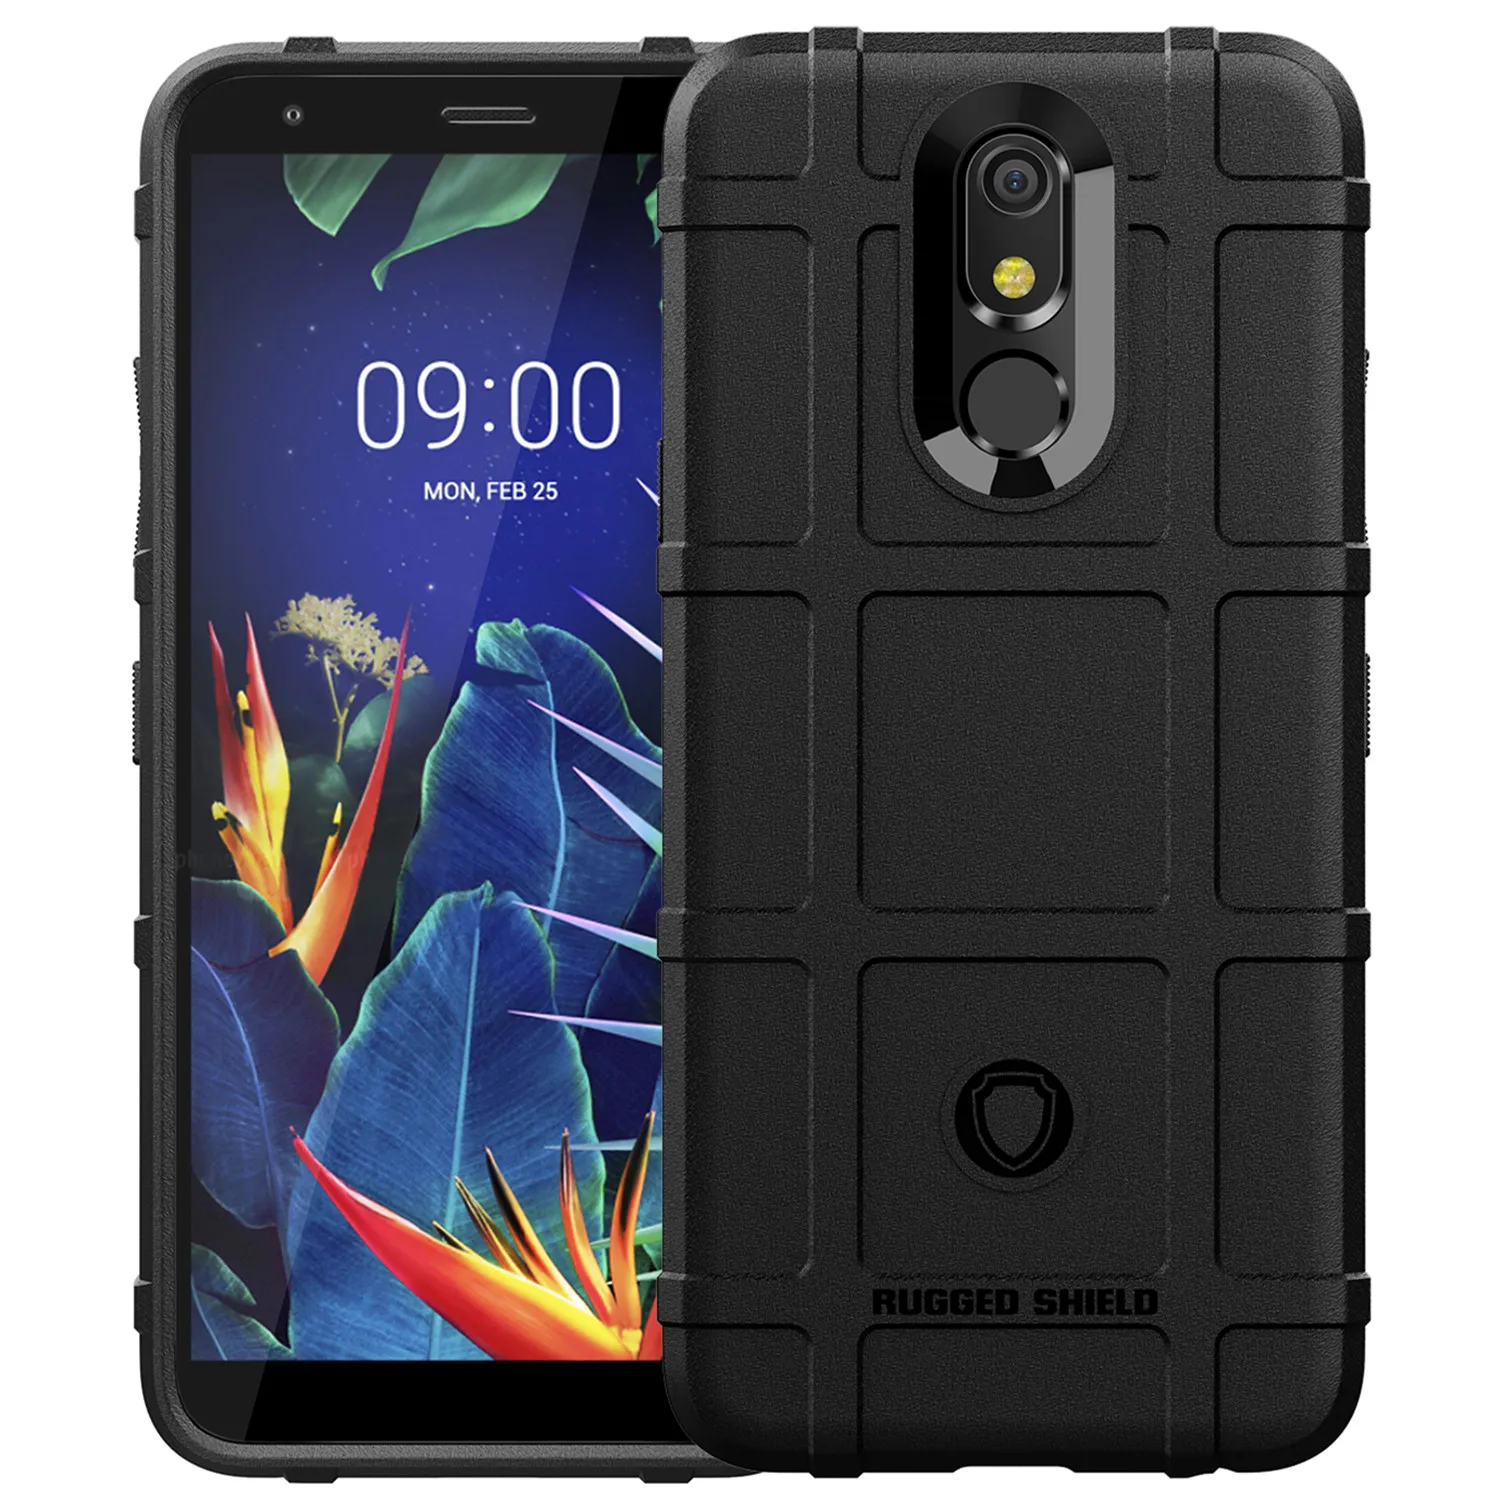 

ShockProof Shield Case For LG X4 2019 x6 lgx4 2019 Armor Heavy Phone Cover for lg x2 2019 X6 Rubber Soft Matte Cases